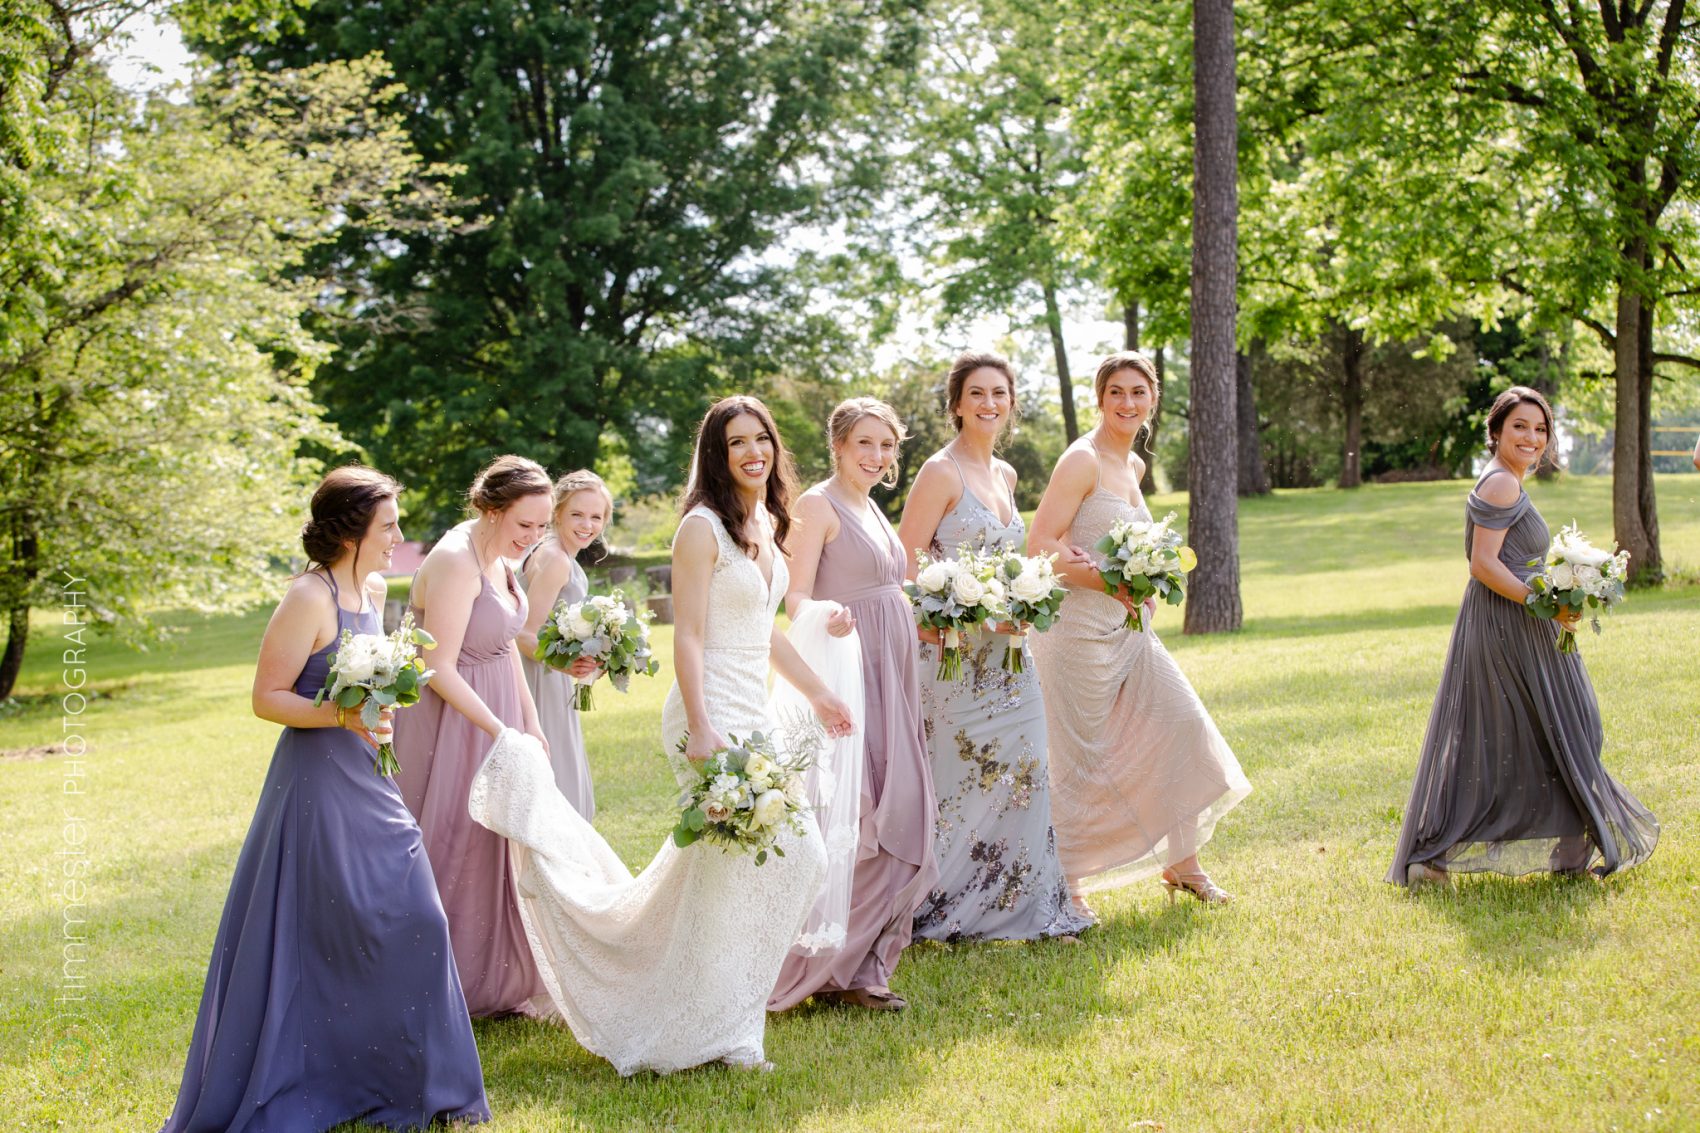 Chloe, the bride, and her bridesmaids walk the property of Barn at Valhalla in Chapel Hill, NC.